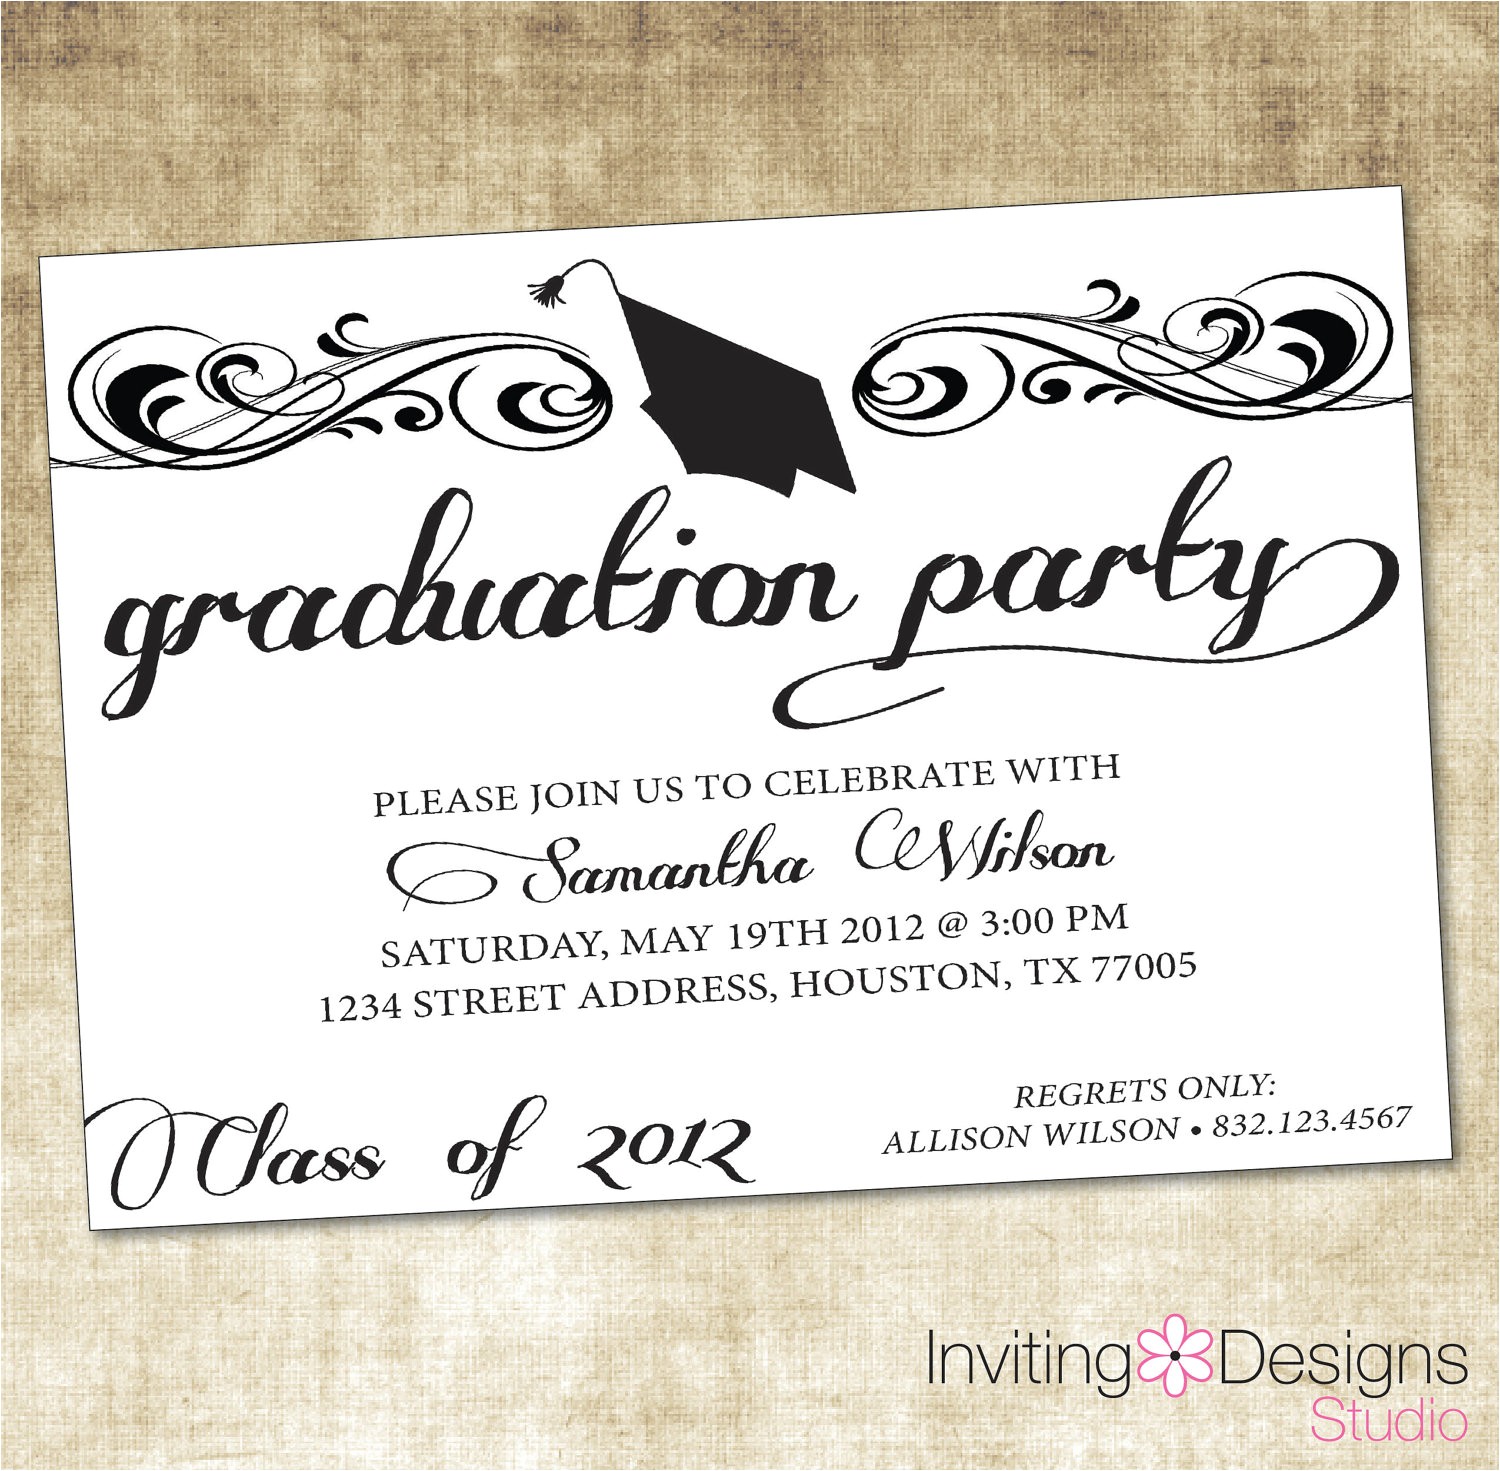 What to Put On A Graduation Party Invitation Unique Ideas for College Graduation Party Invitations